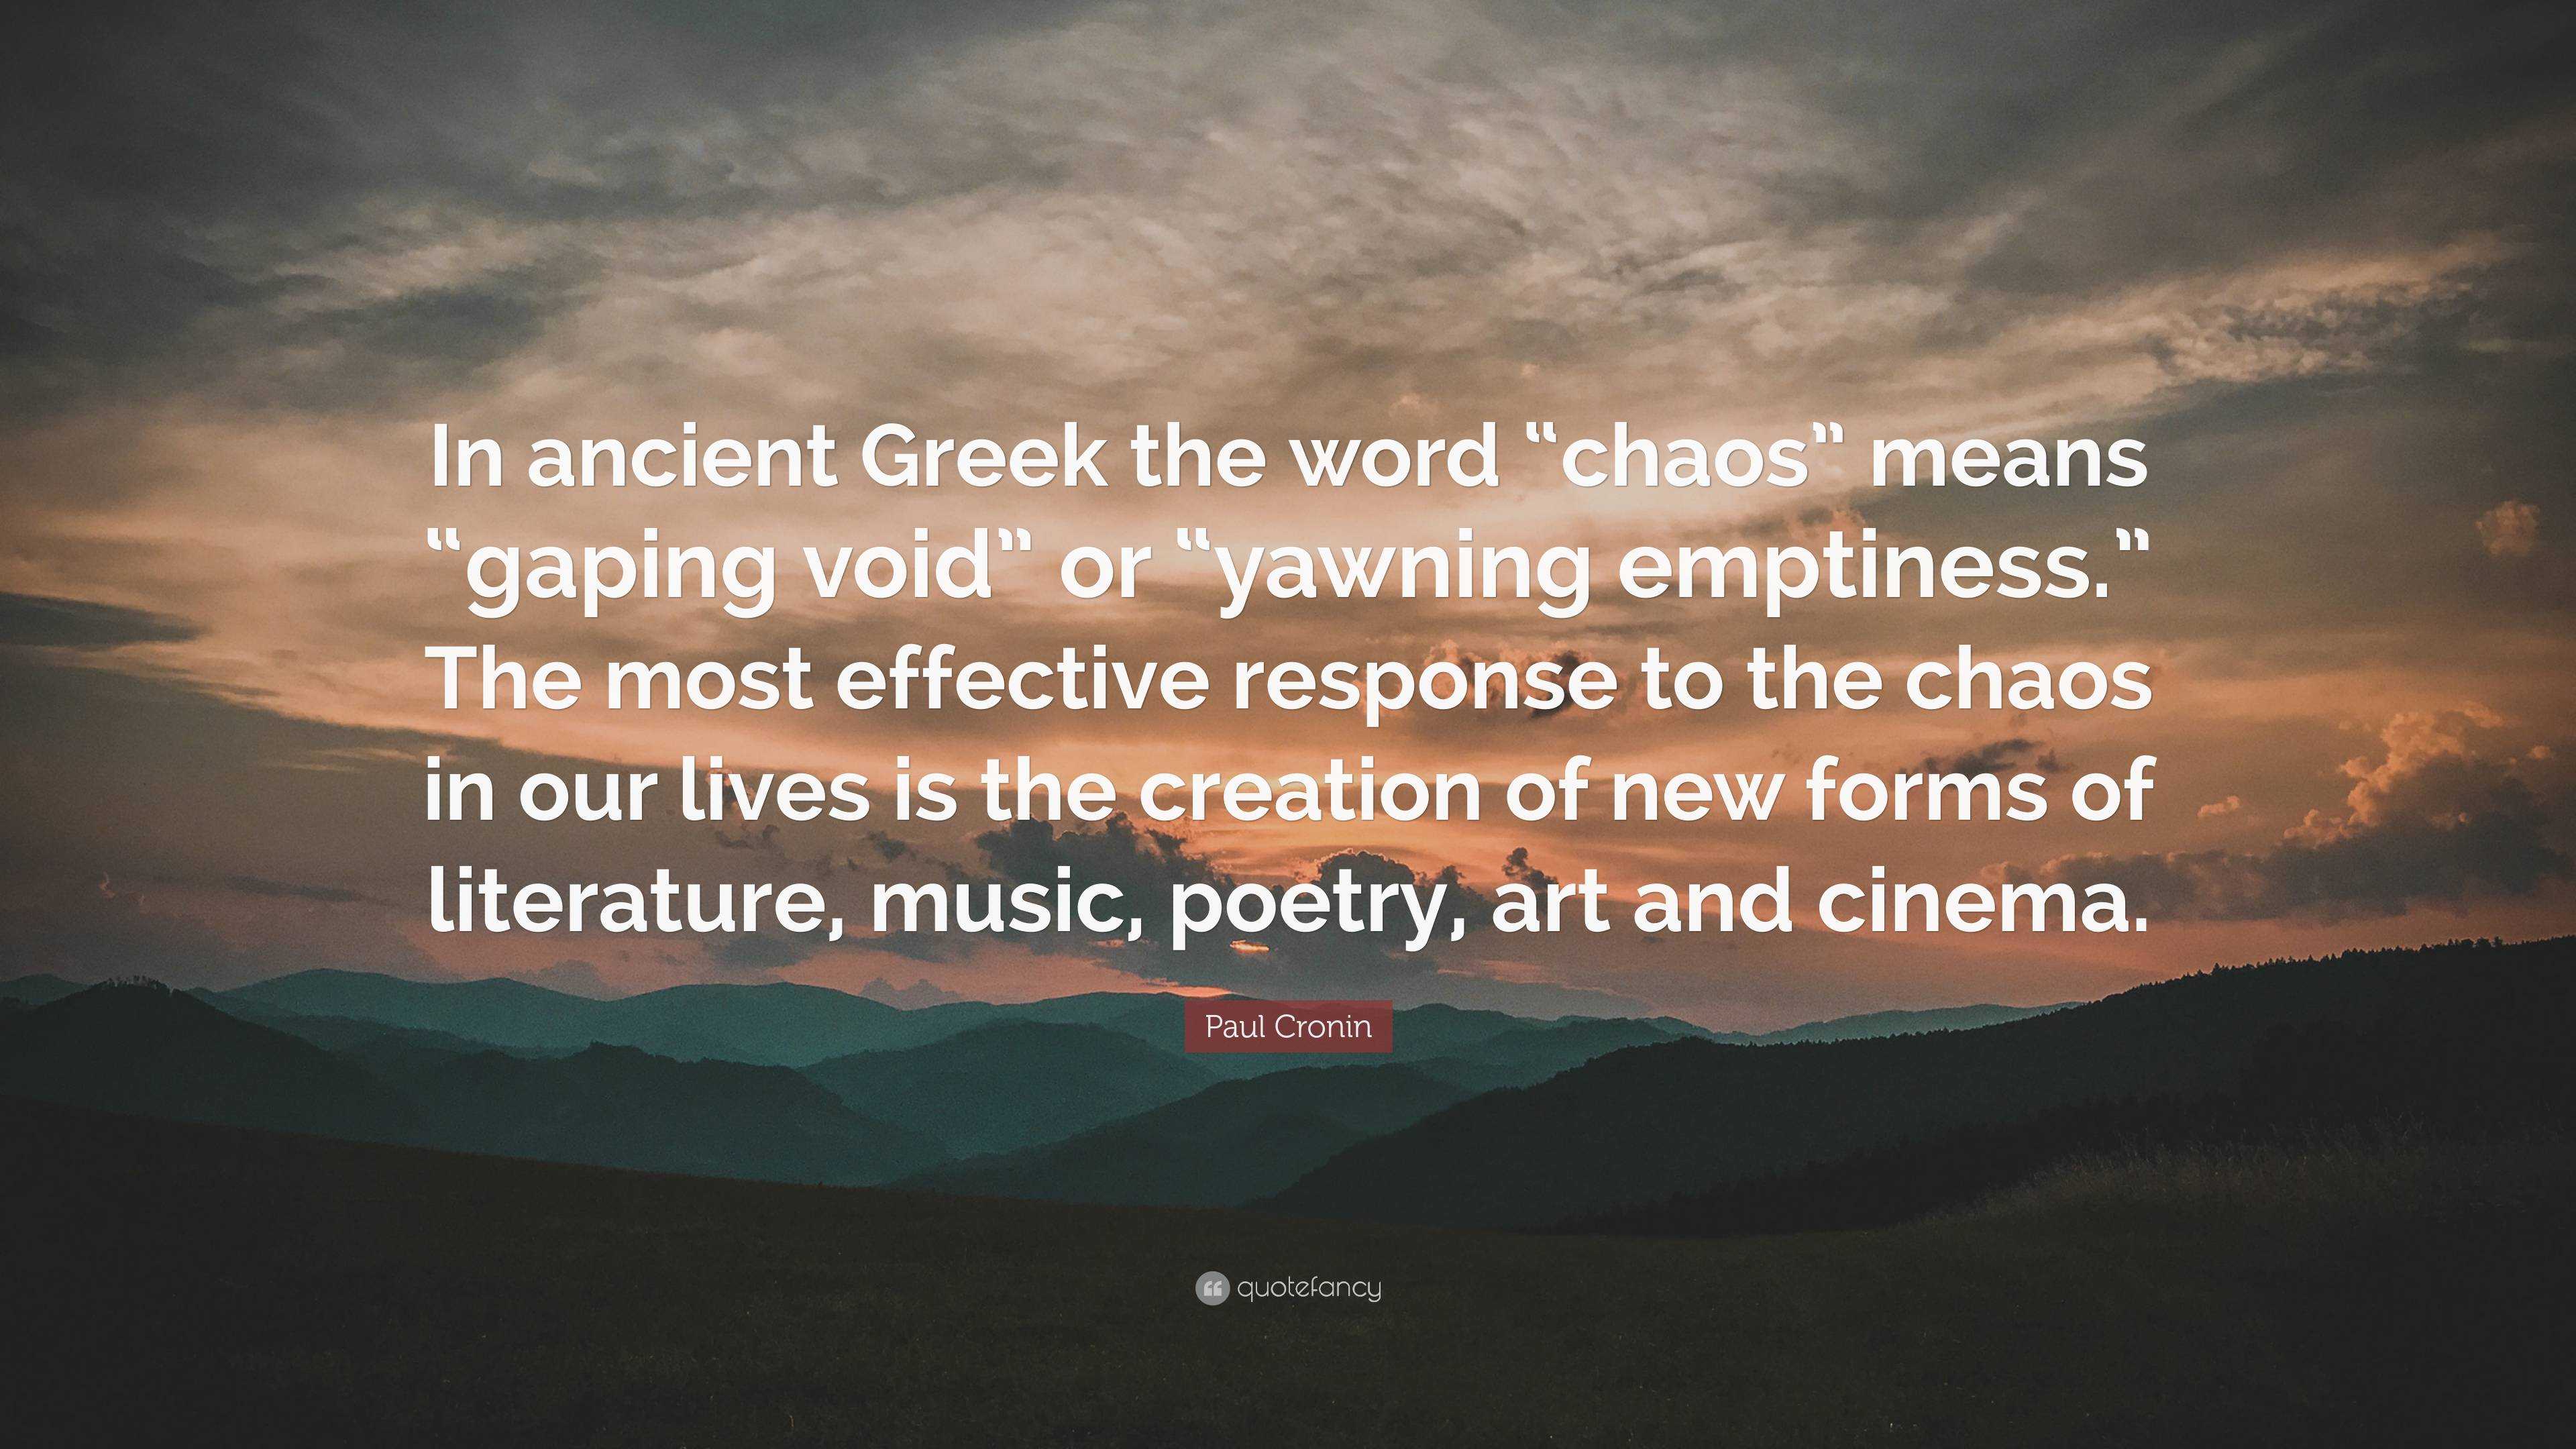 Paul Cronin Quote: “In ancient Greek the word “chaos” means “gaping void”  or “yawning emptiness.” The most effective response to the chaos i”